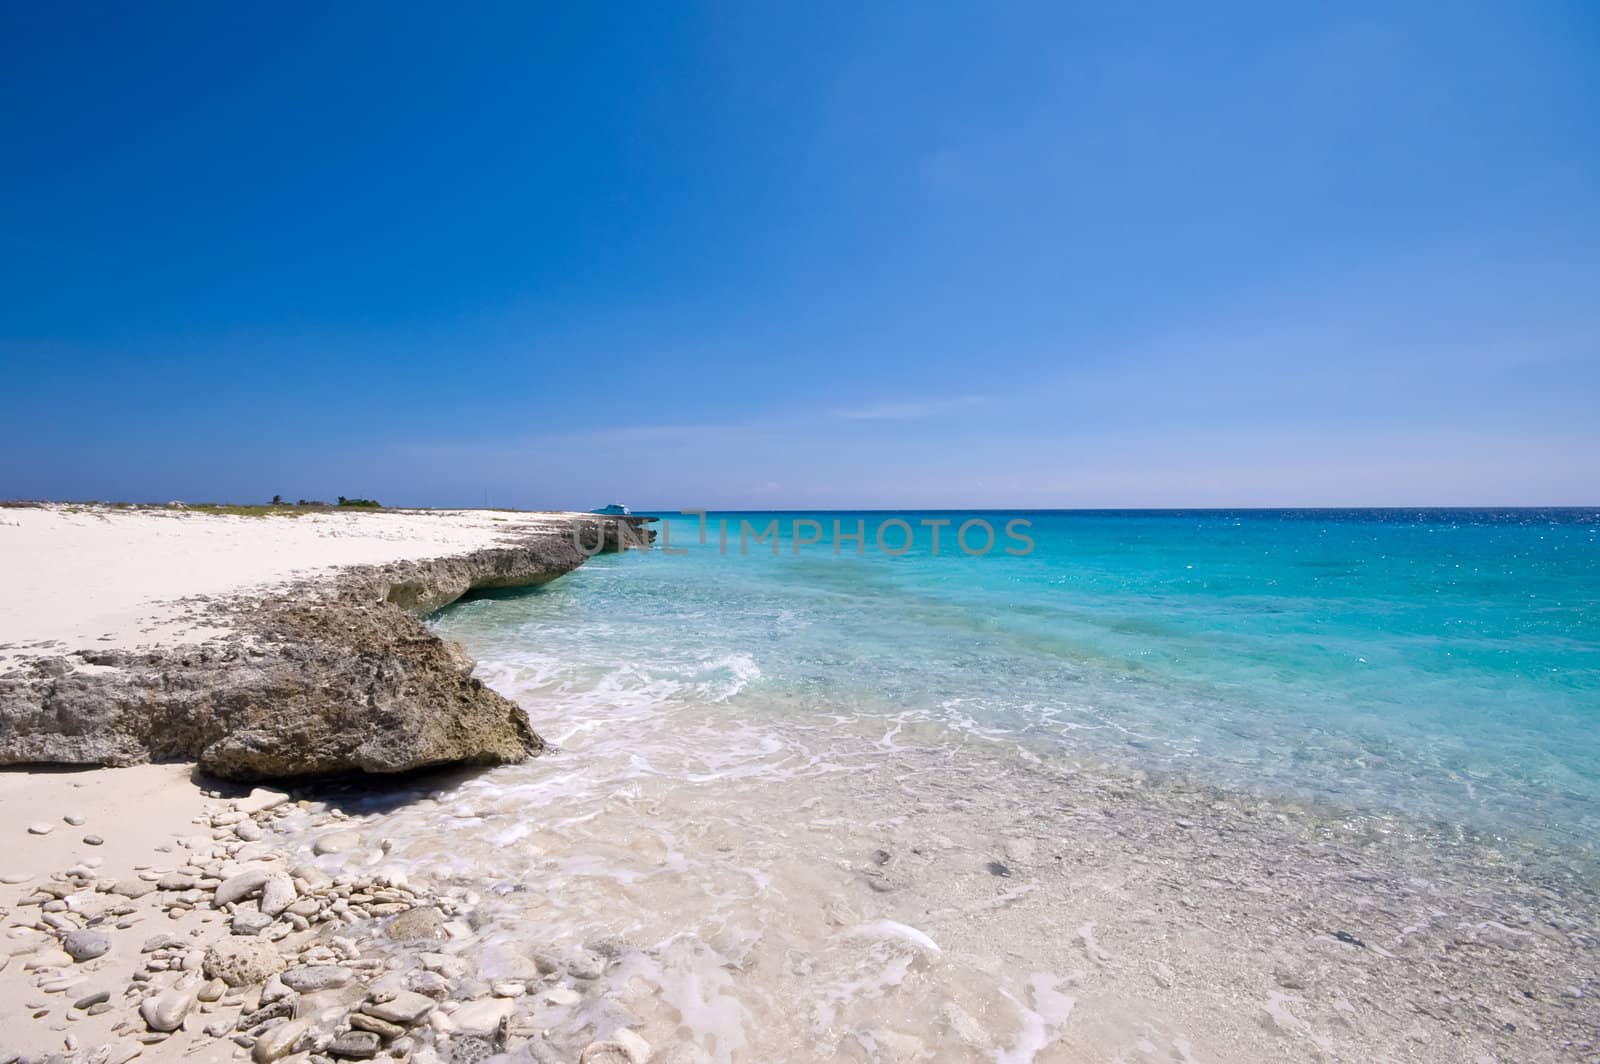 tropical turquoise sea landscape with a rocky shore line
